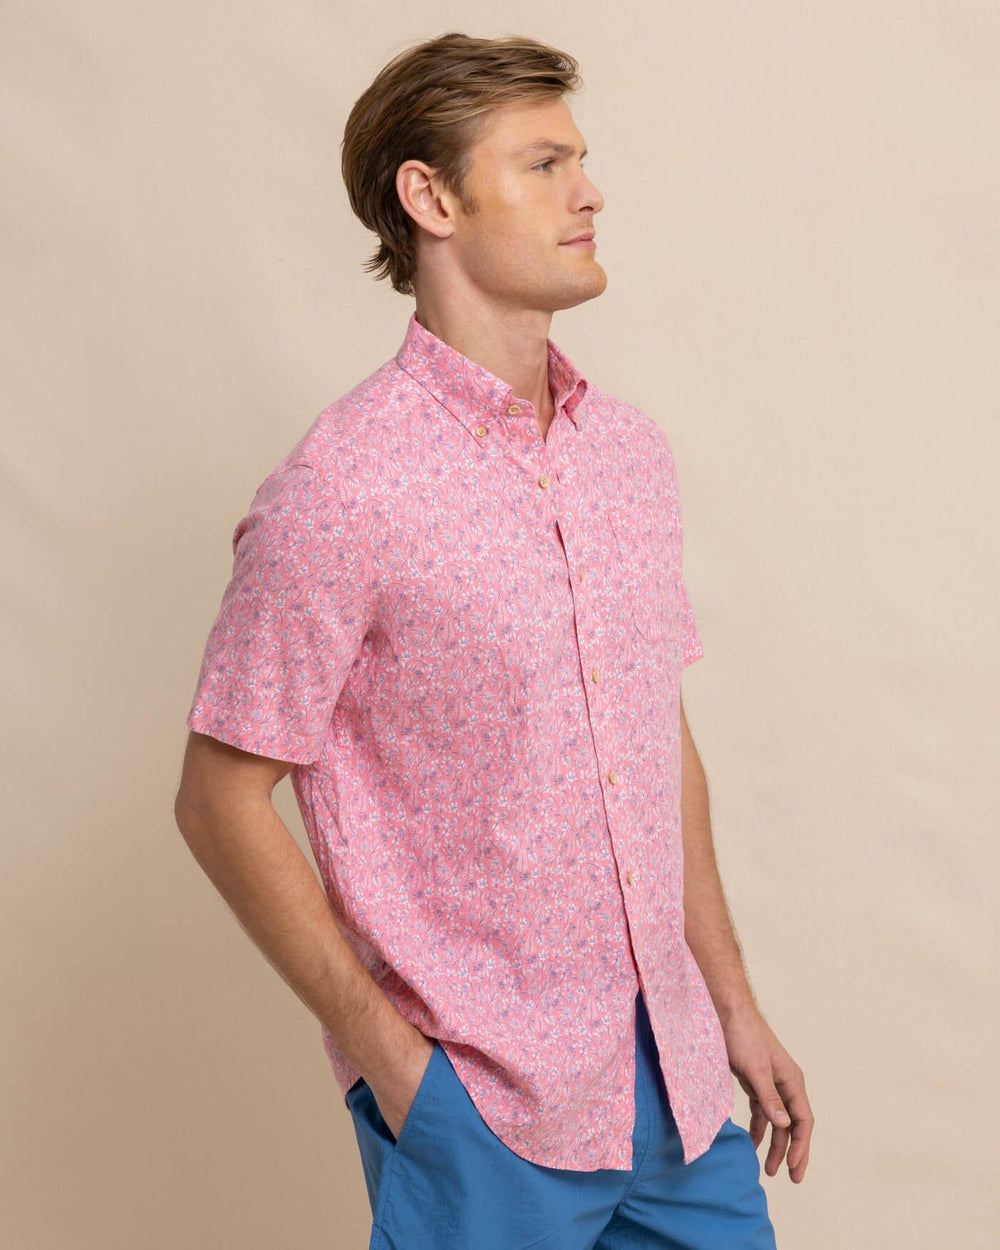 The front view of the Southern Tide Linen Rayon Ditzy Floral Short Sleeve Sport Shirt by Southern Tide - Geranium Pink